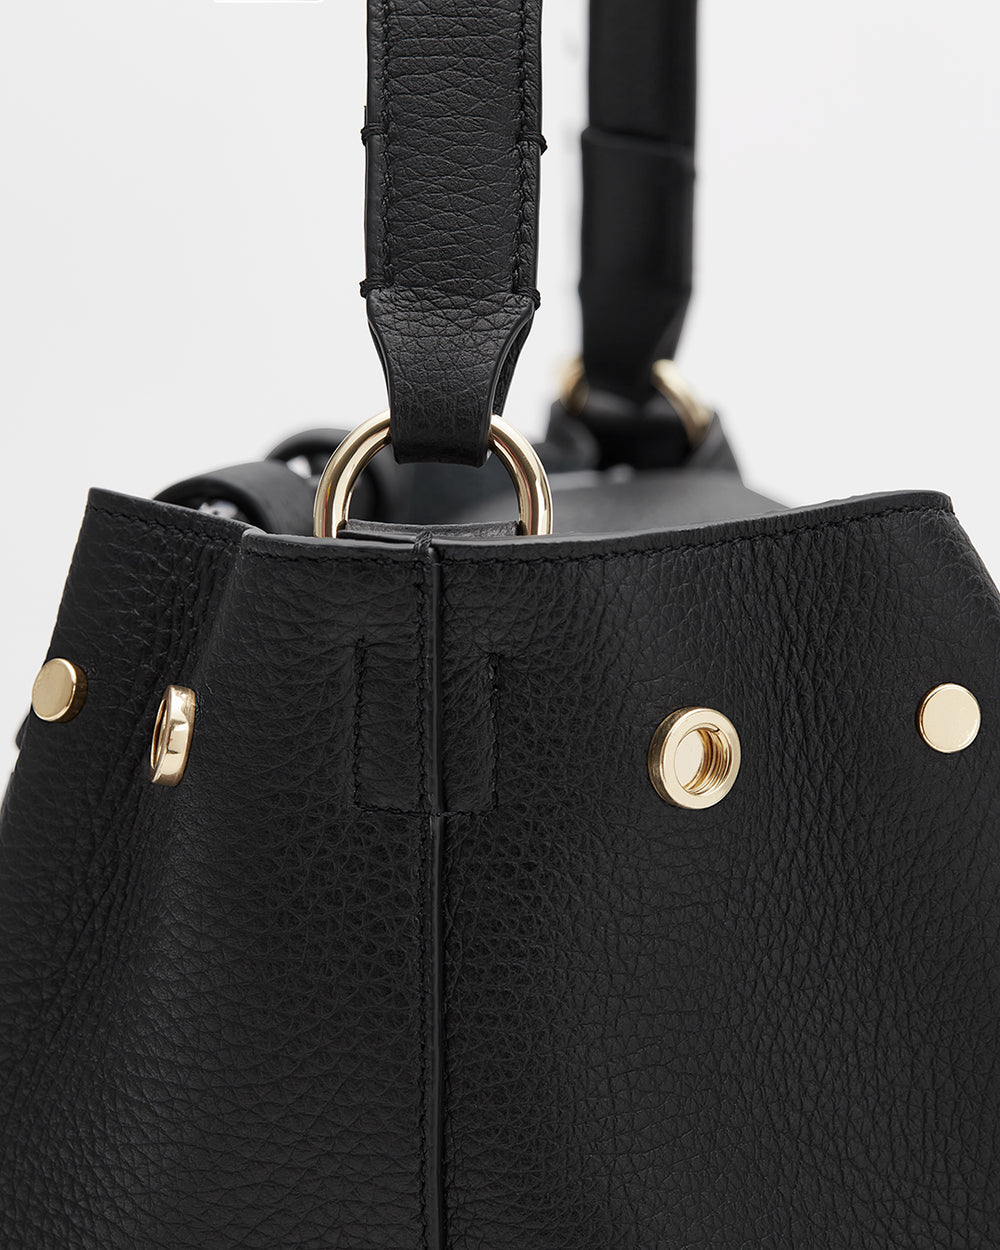 Close-up of a handbag with metallic rivets and a partial view of the handle.